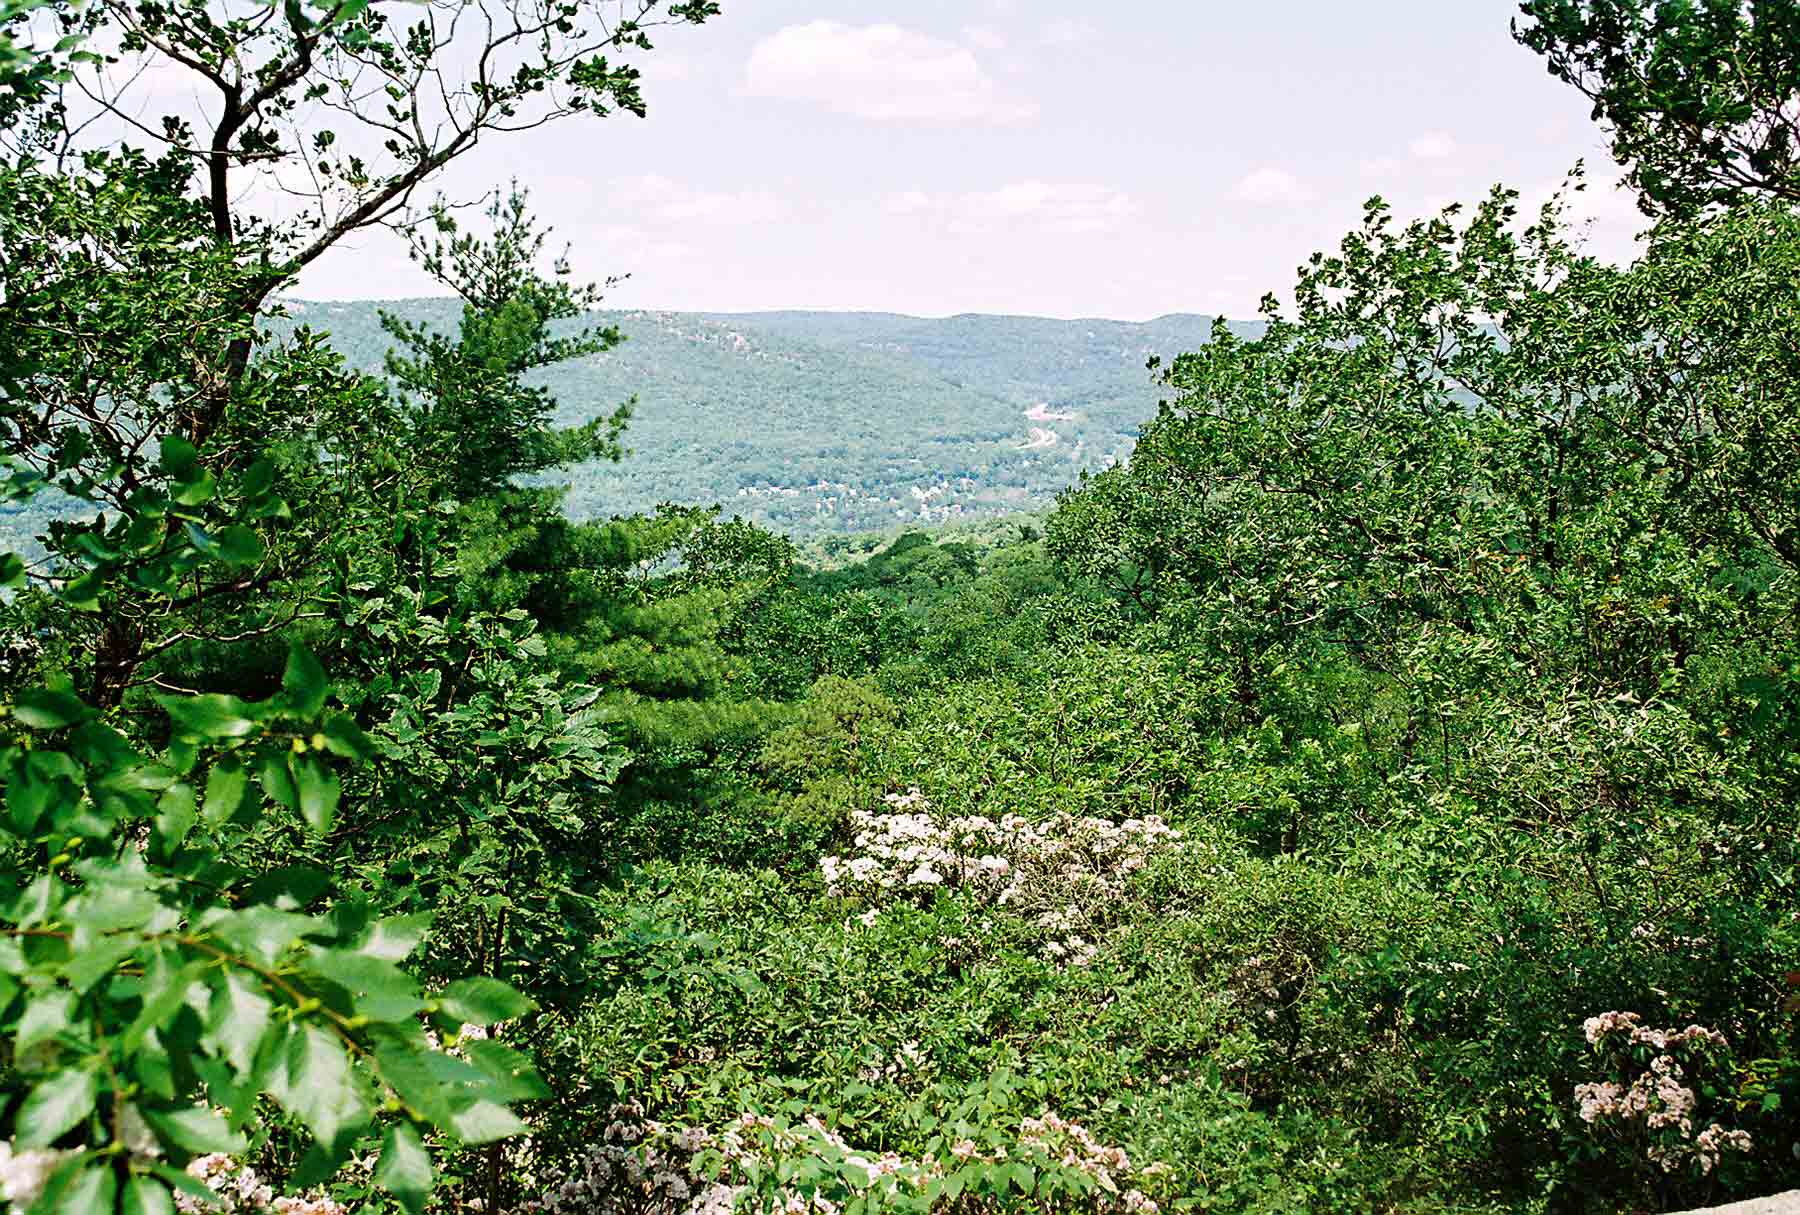 View west from Canada Hill taken in June when laurel was in full bloom.  Courtesy dlcul@conncoll.edu